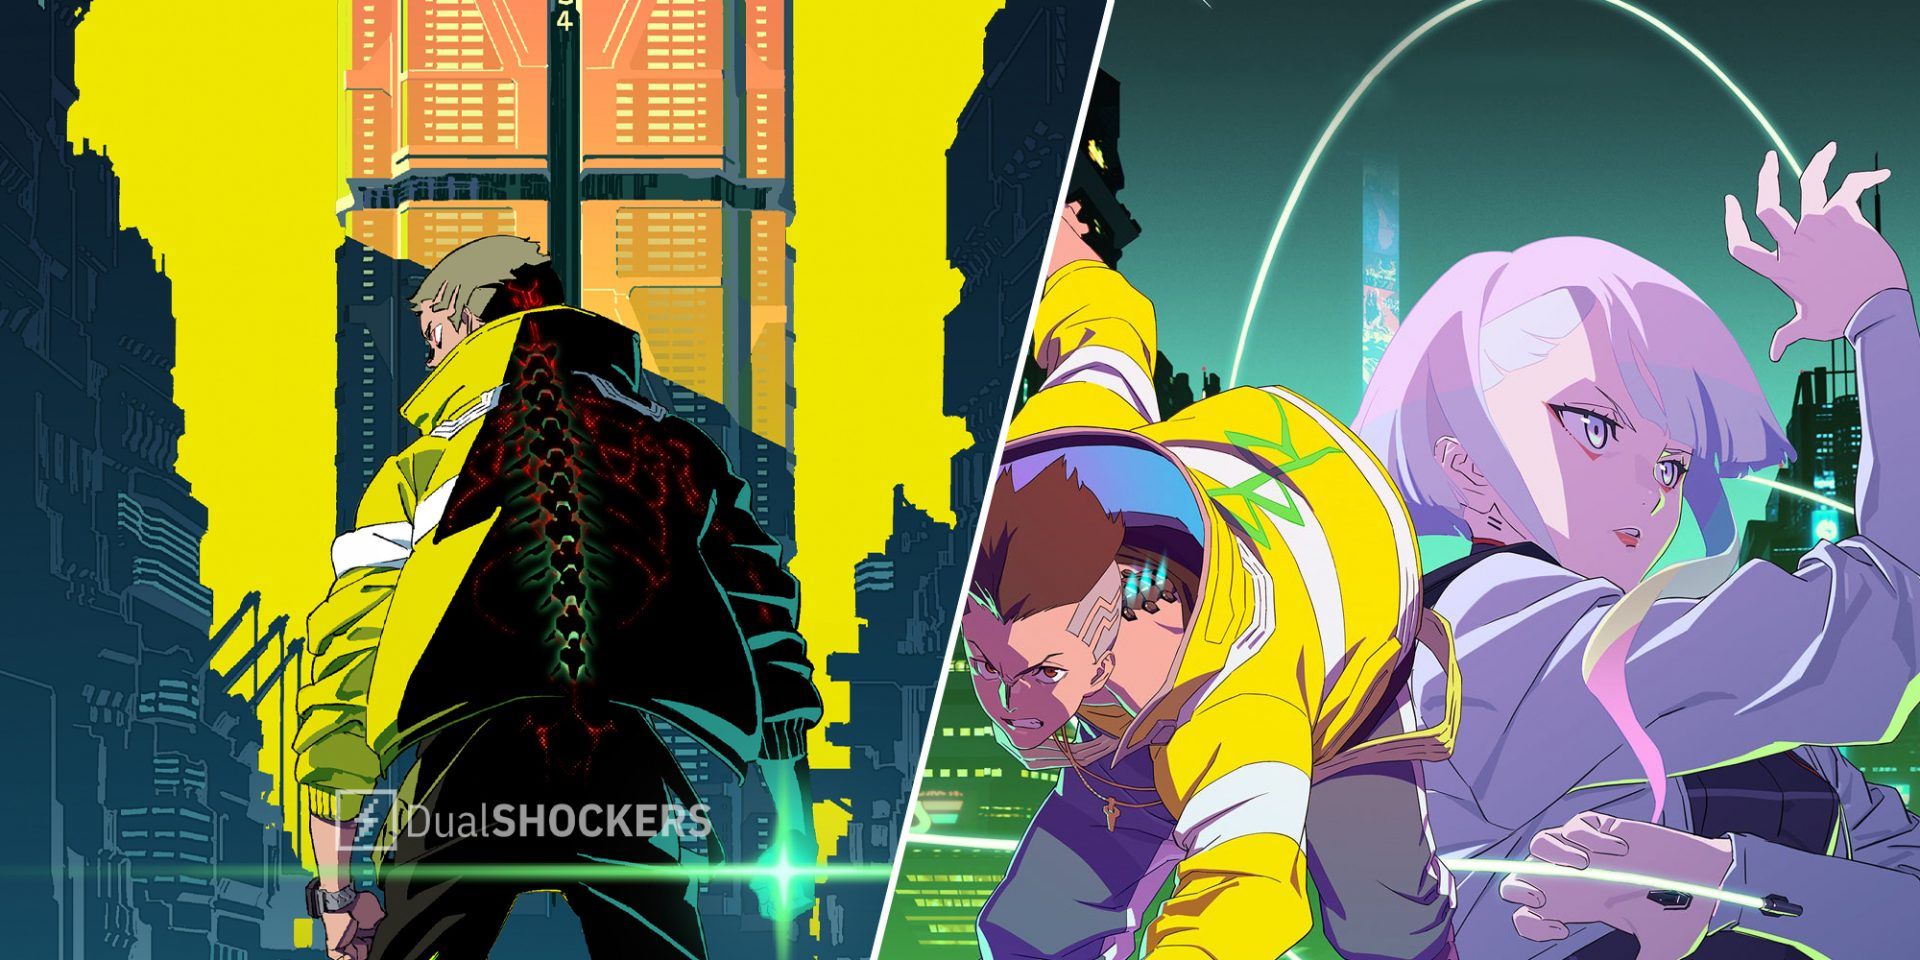 5 Things We Liked, and 3 We Didn't, About Cyberpunk Edgerunners